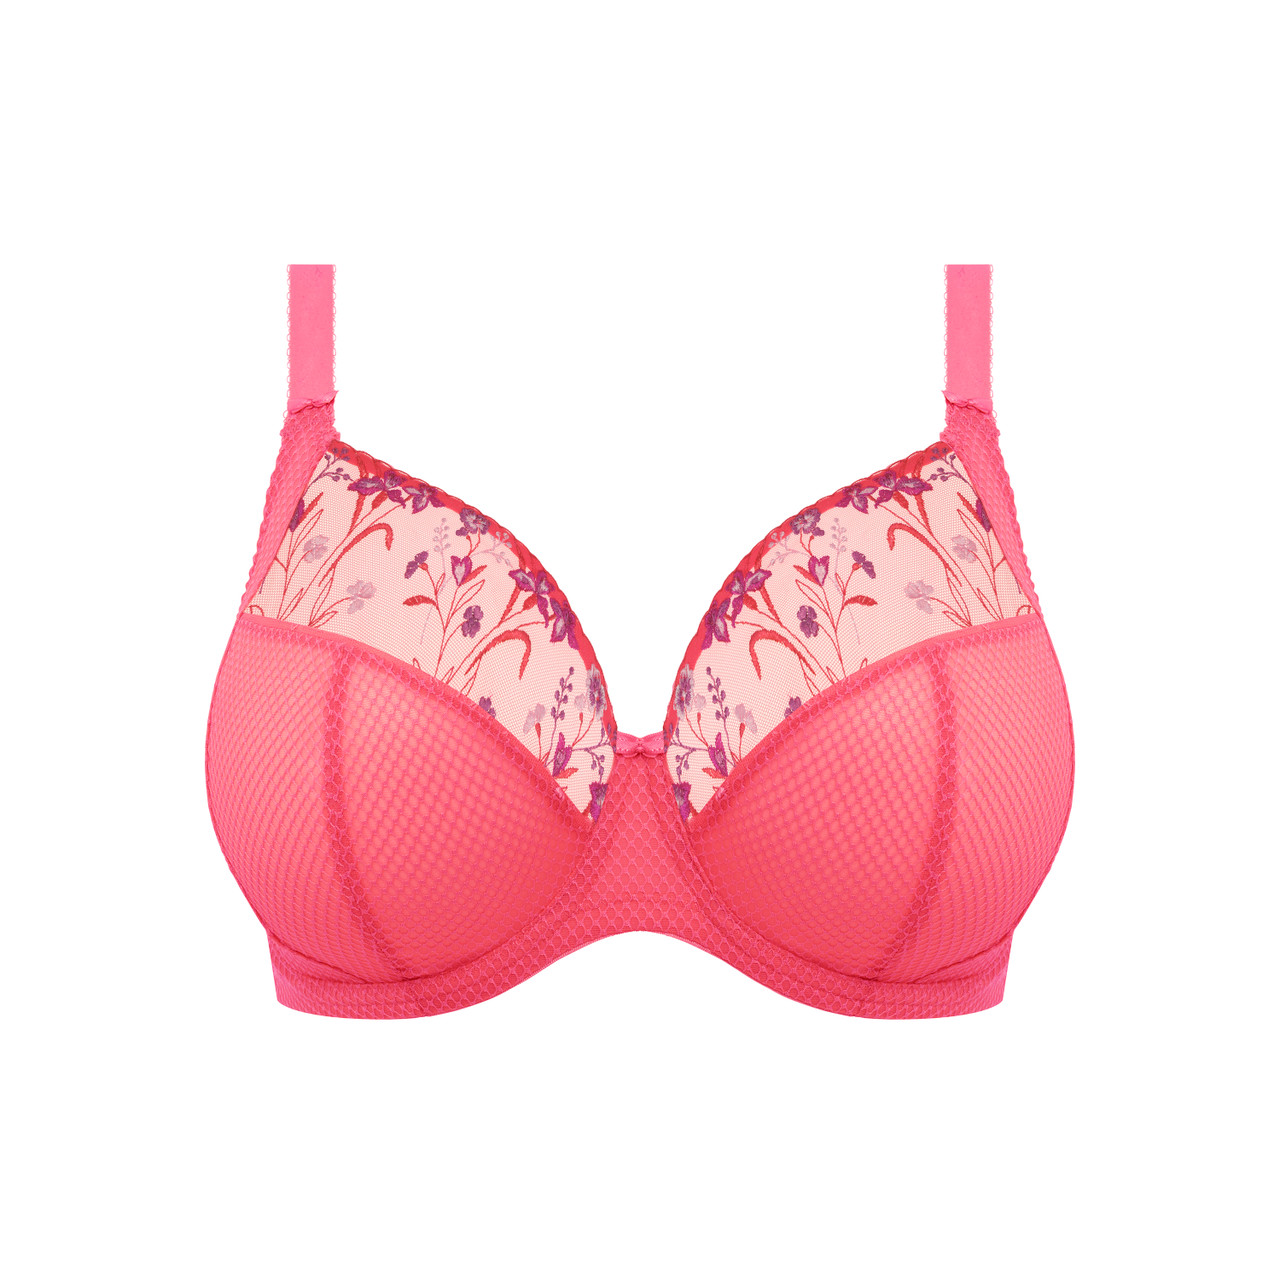 Elomi Charley Underwire Plunge Bra with Stretch Lace in Honeysuckle (HOE)  FINAL SALE (40% Off) - Busted Bra Shop